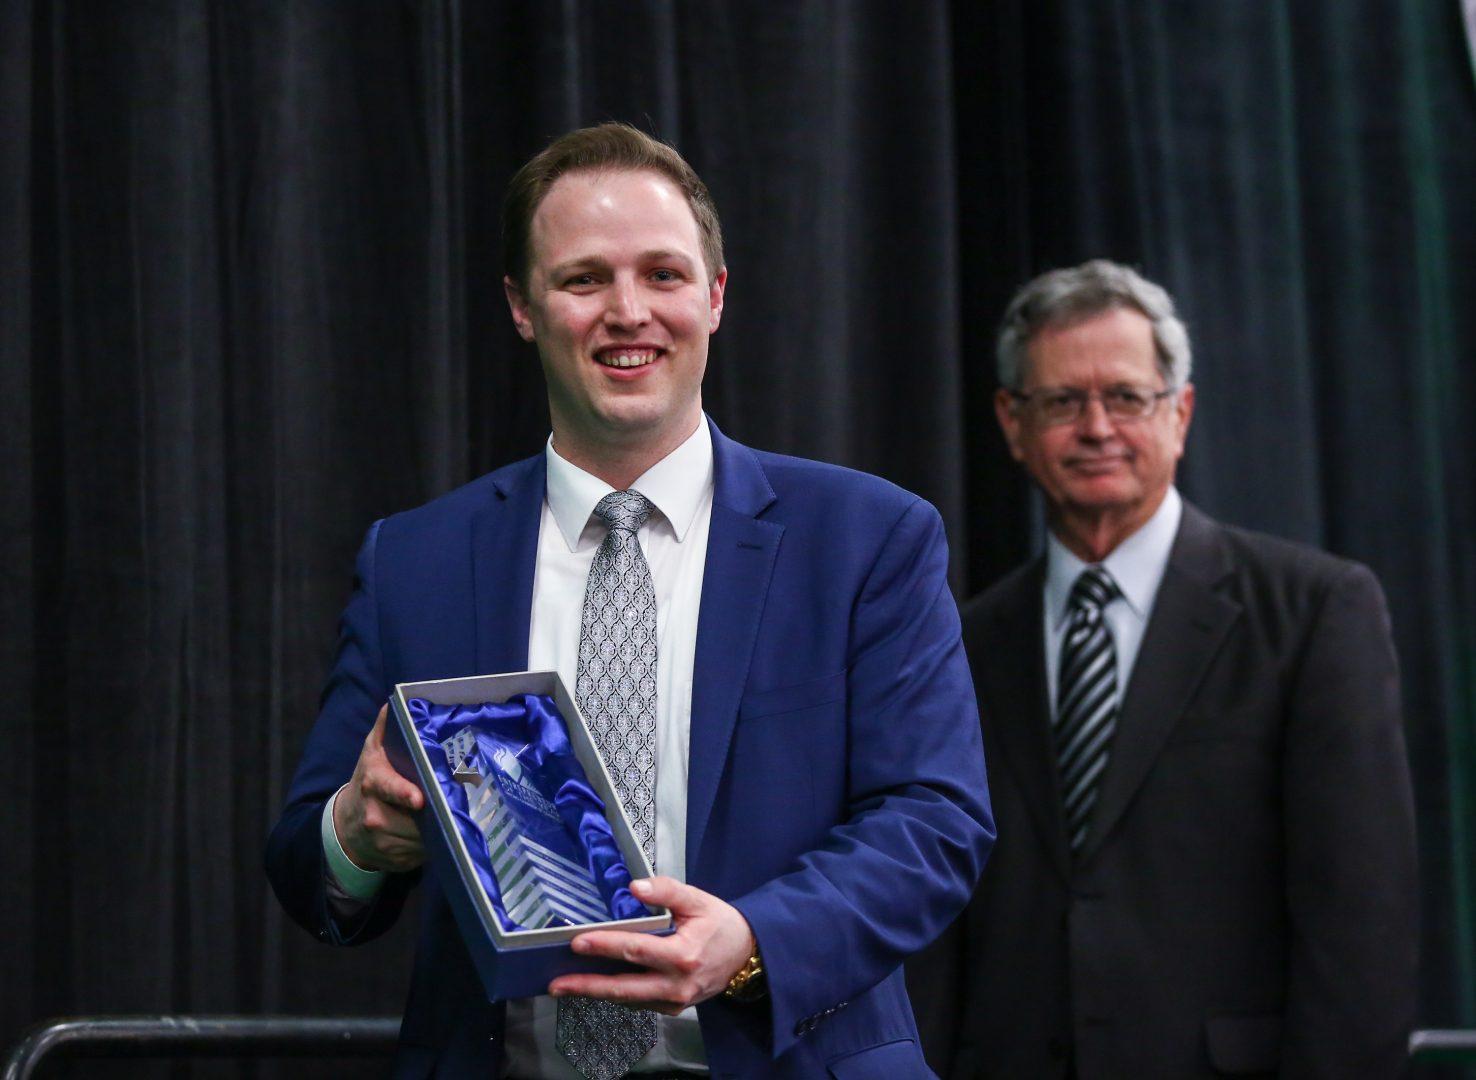 Fresno State alumnus Daniel Malcom wins the Student Entrepreneur Award for his Sparkle Ties at the Fresno Chamber of Commerce Entrepreneur of the Year awards on Tuesday, Feb. 13, at The New Exhibit Hall in downtown Fresno. (Alejandro Soto/The Collegian)